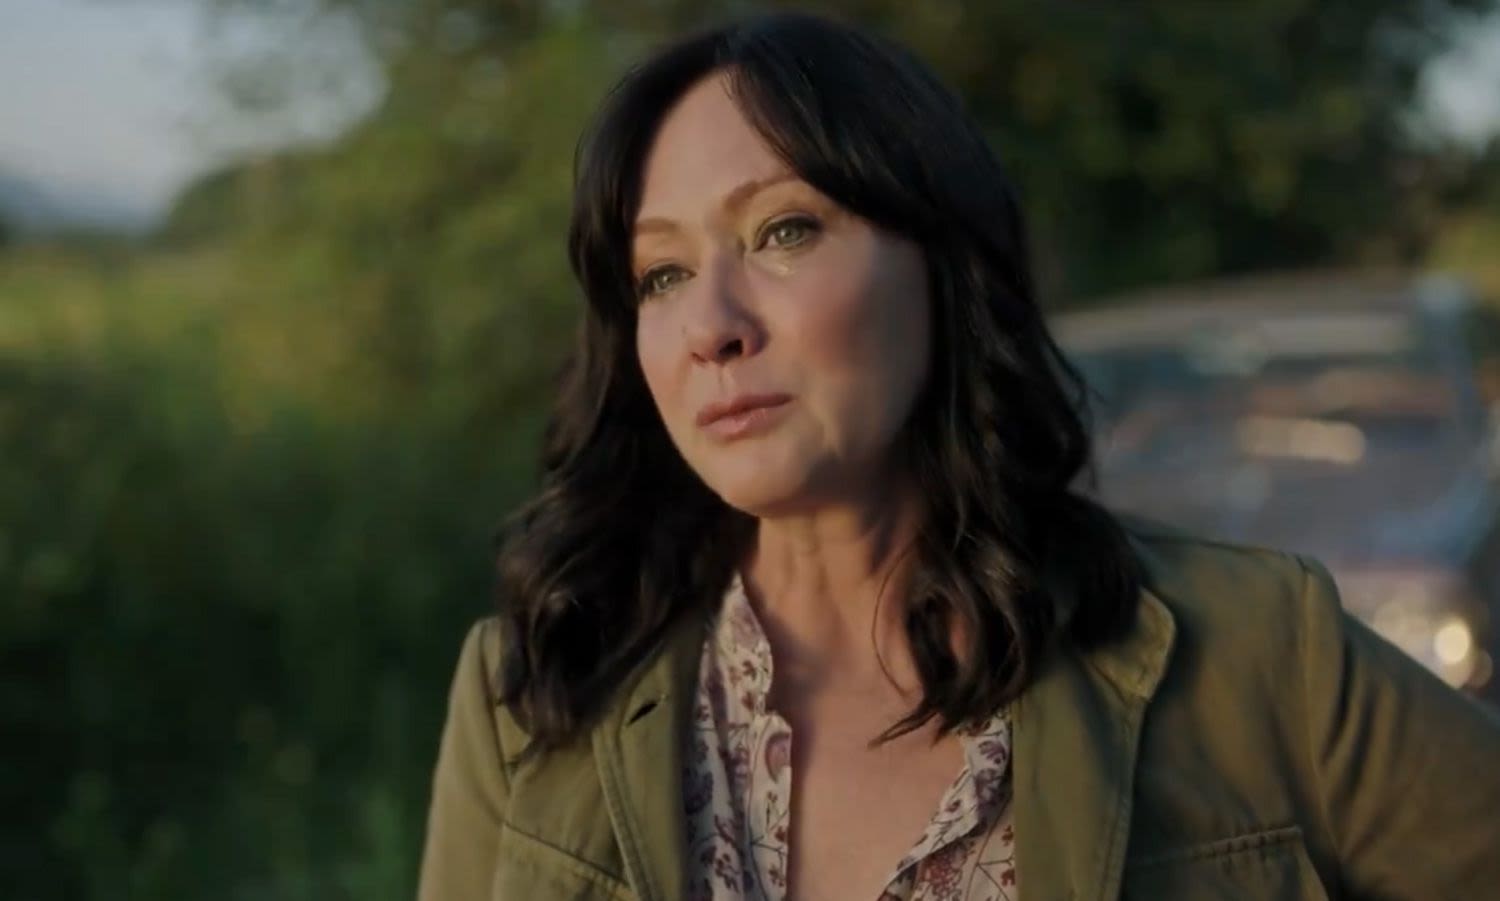 Shannen Doherty Paid Tribute to Luke Perry with Emotional 'Riverdale' Cameo: "He Saved My Life"